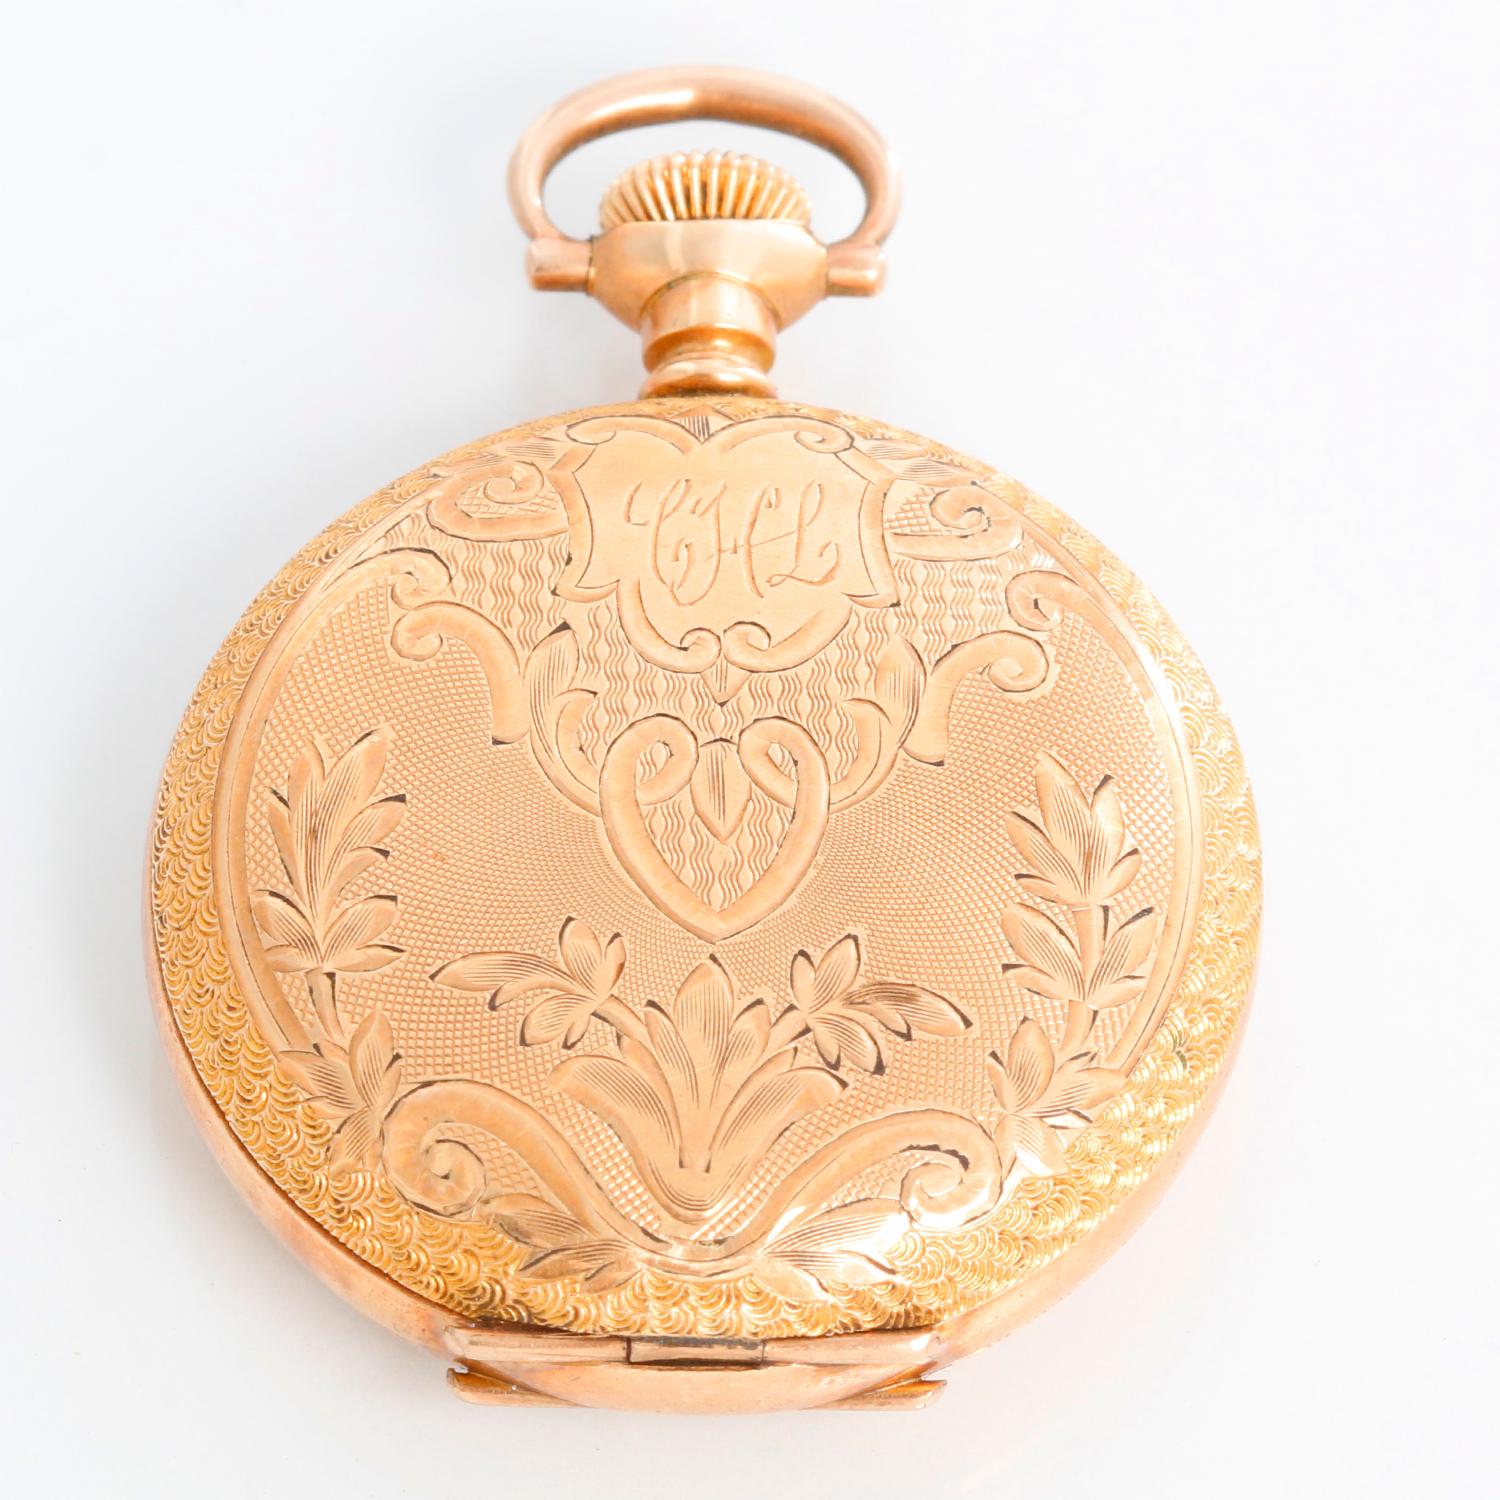 Hampden Gold Filled Ladies Pendant Pocket Watch - Manual winding. Gold filled; ornate engraving ( 33mm ). White dial with Arabic numerals. Pre-owned with custom box.
Will be serviced upon purchase. Delivery time will vary. Circa 1905.